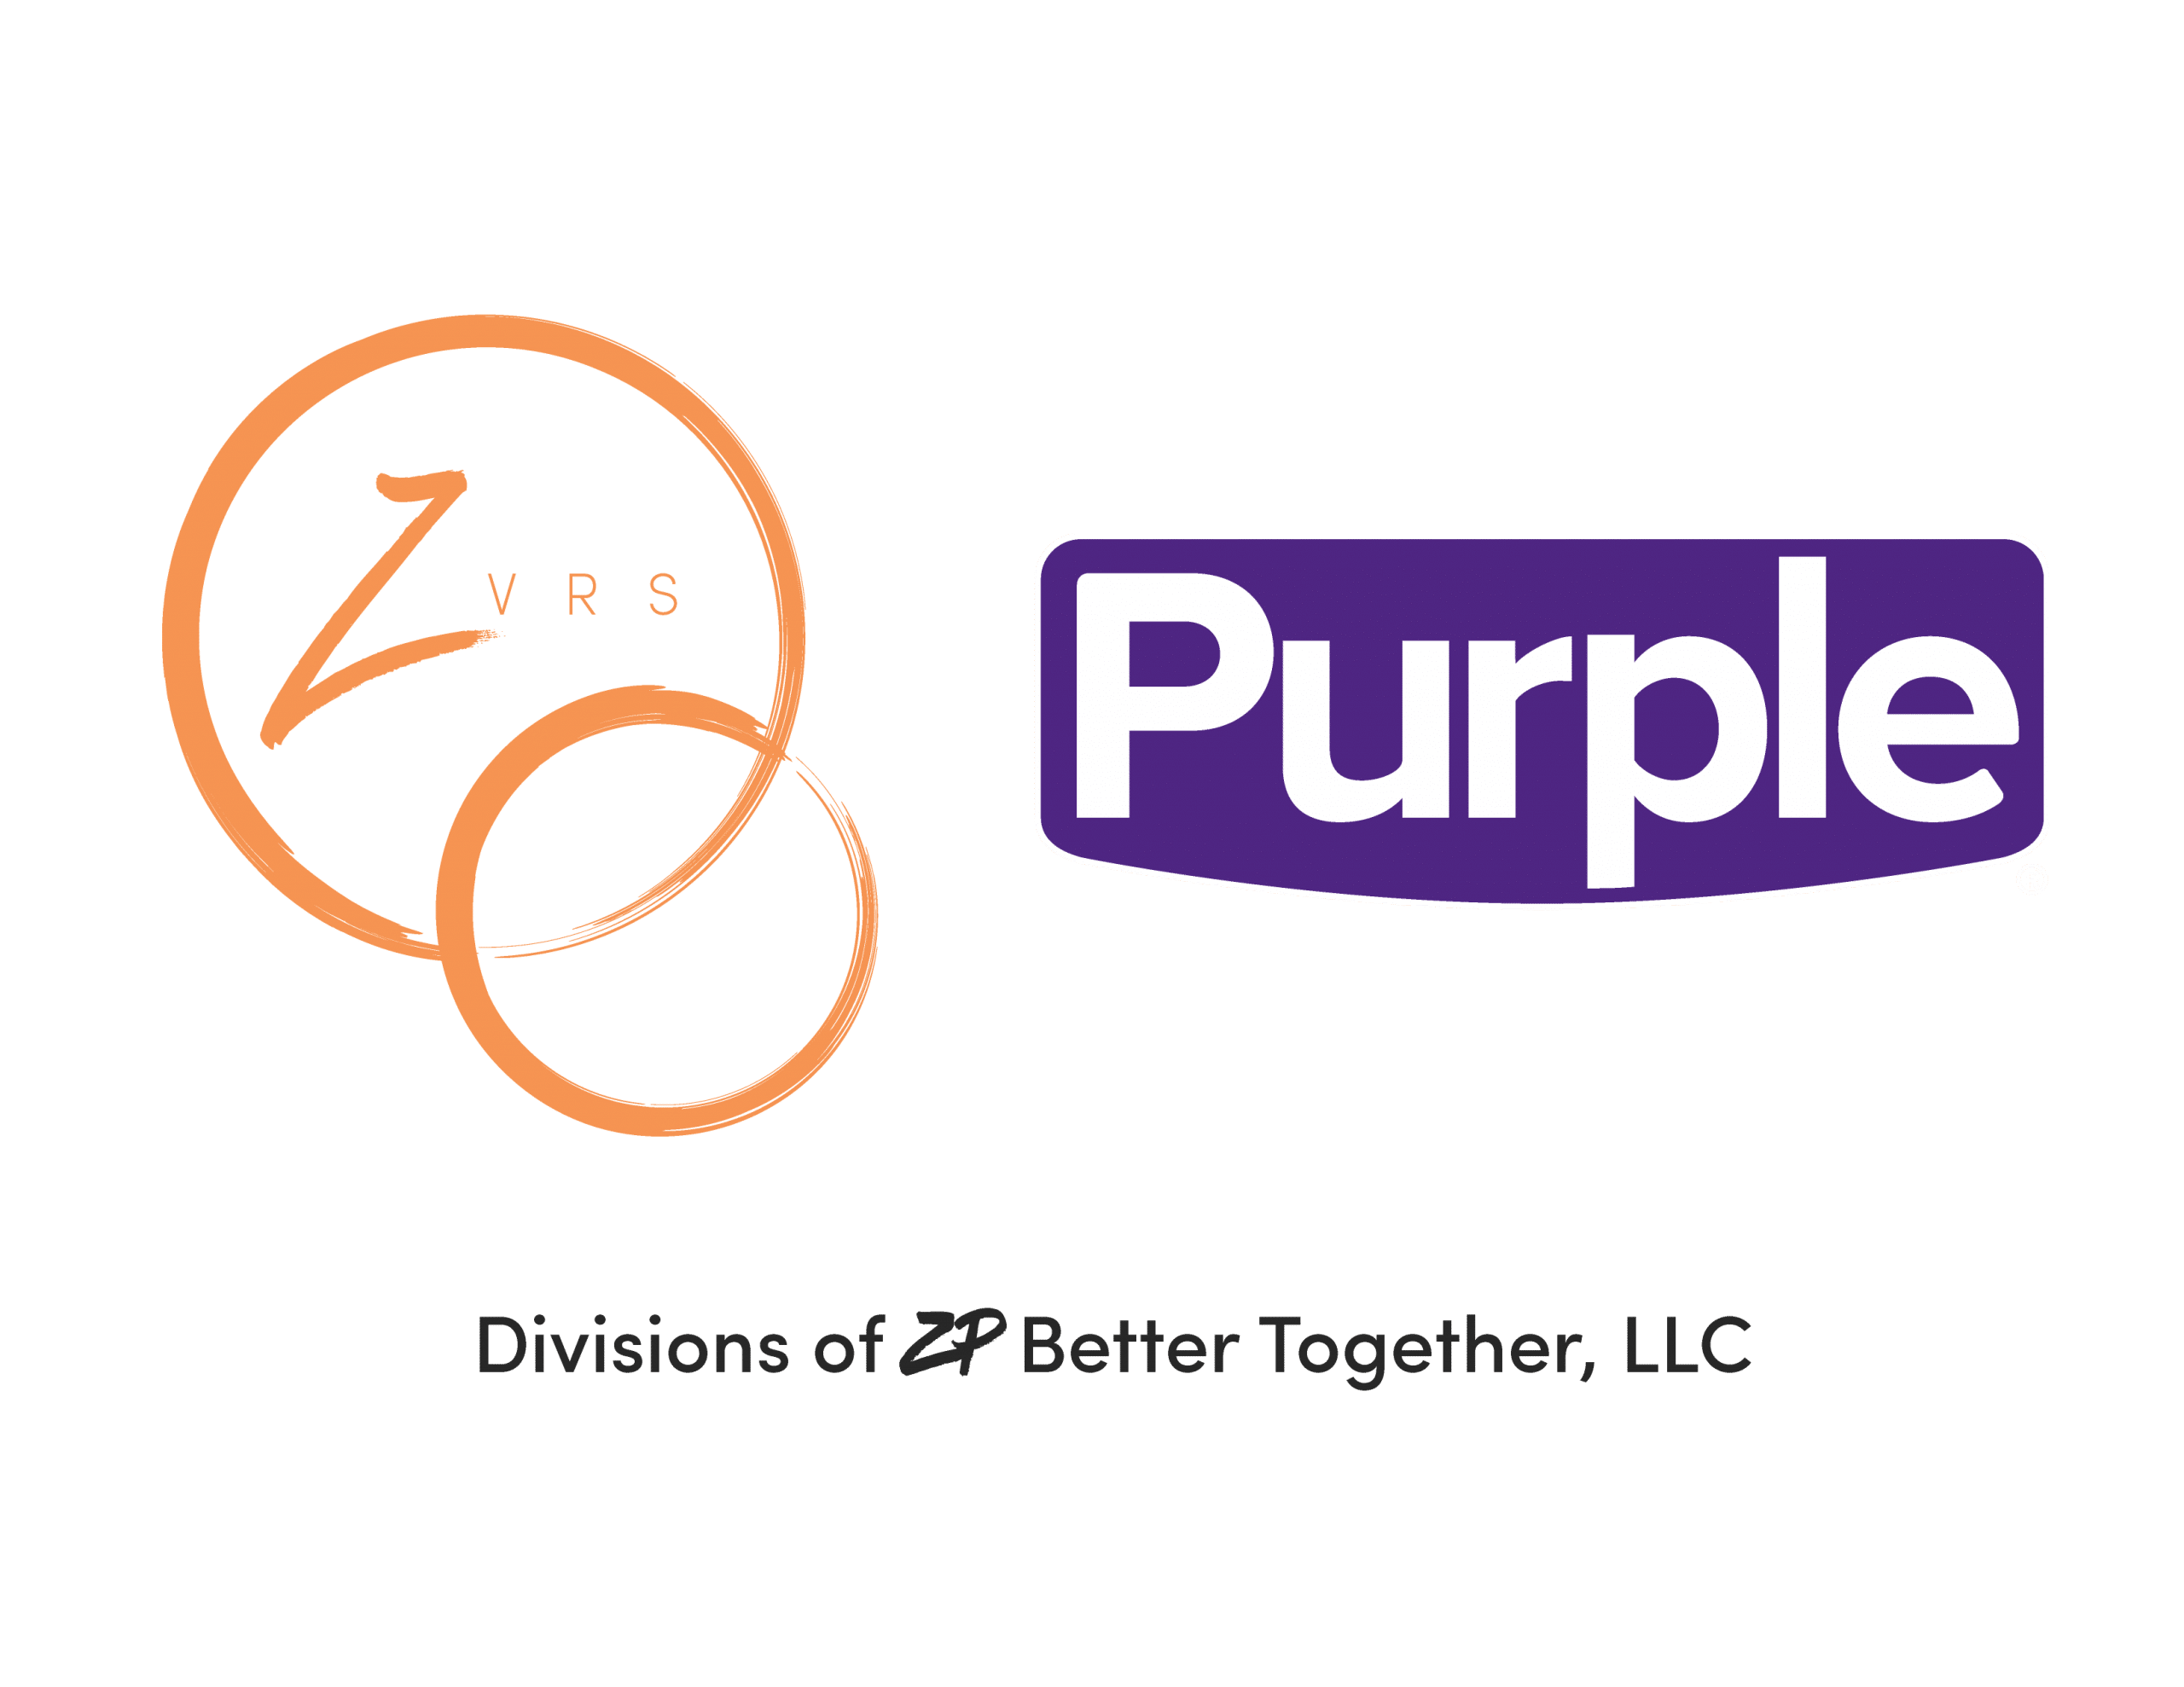 ZVRS and Purple Logo (division of ZP Better Together)